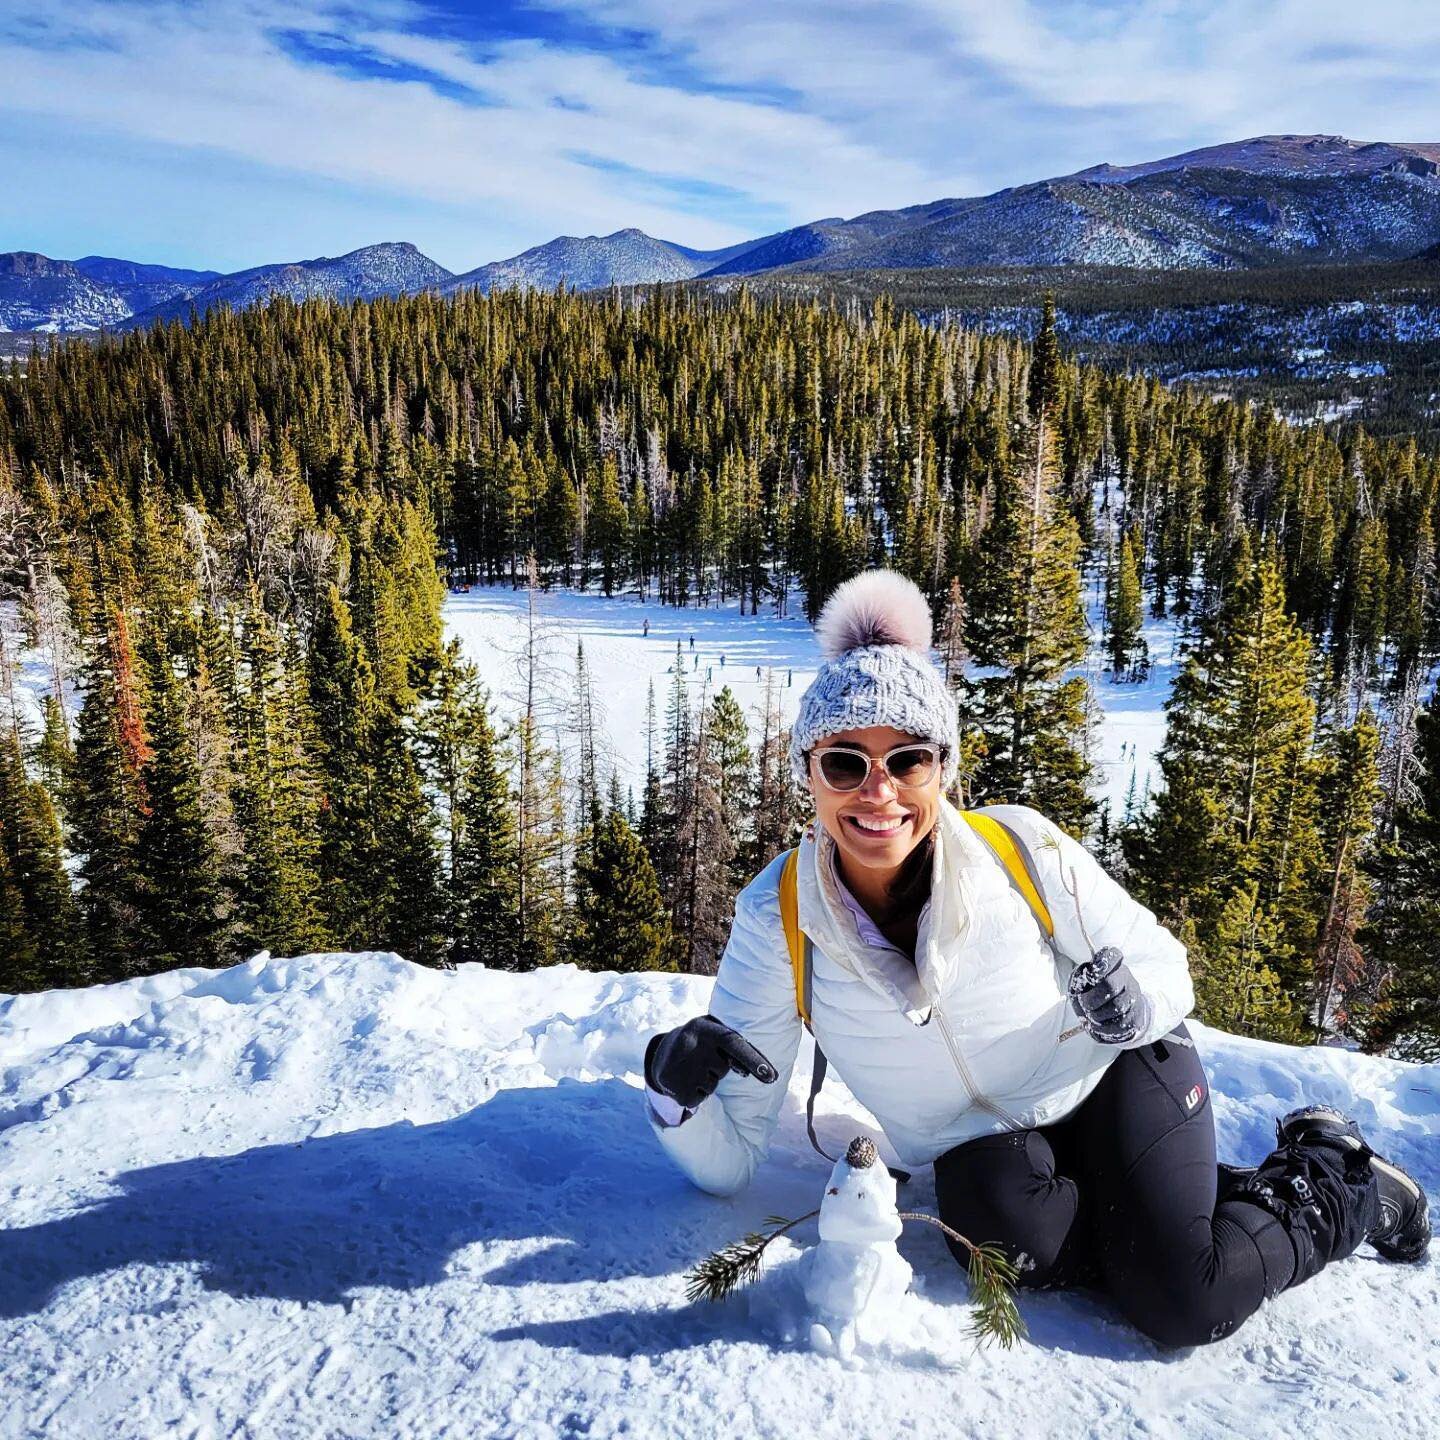 Let's go hiking in every season! Bring your friends! Make some friends!

What will we do- you ask?  Dance on a frozen lake at 10,000 ft ! Enjoy the views from trees, skis or our knees! 

Rocky Mountain National Park is a treasure!  The hike to Emeral